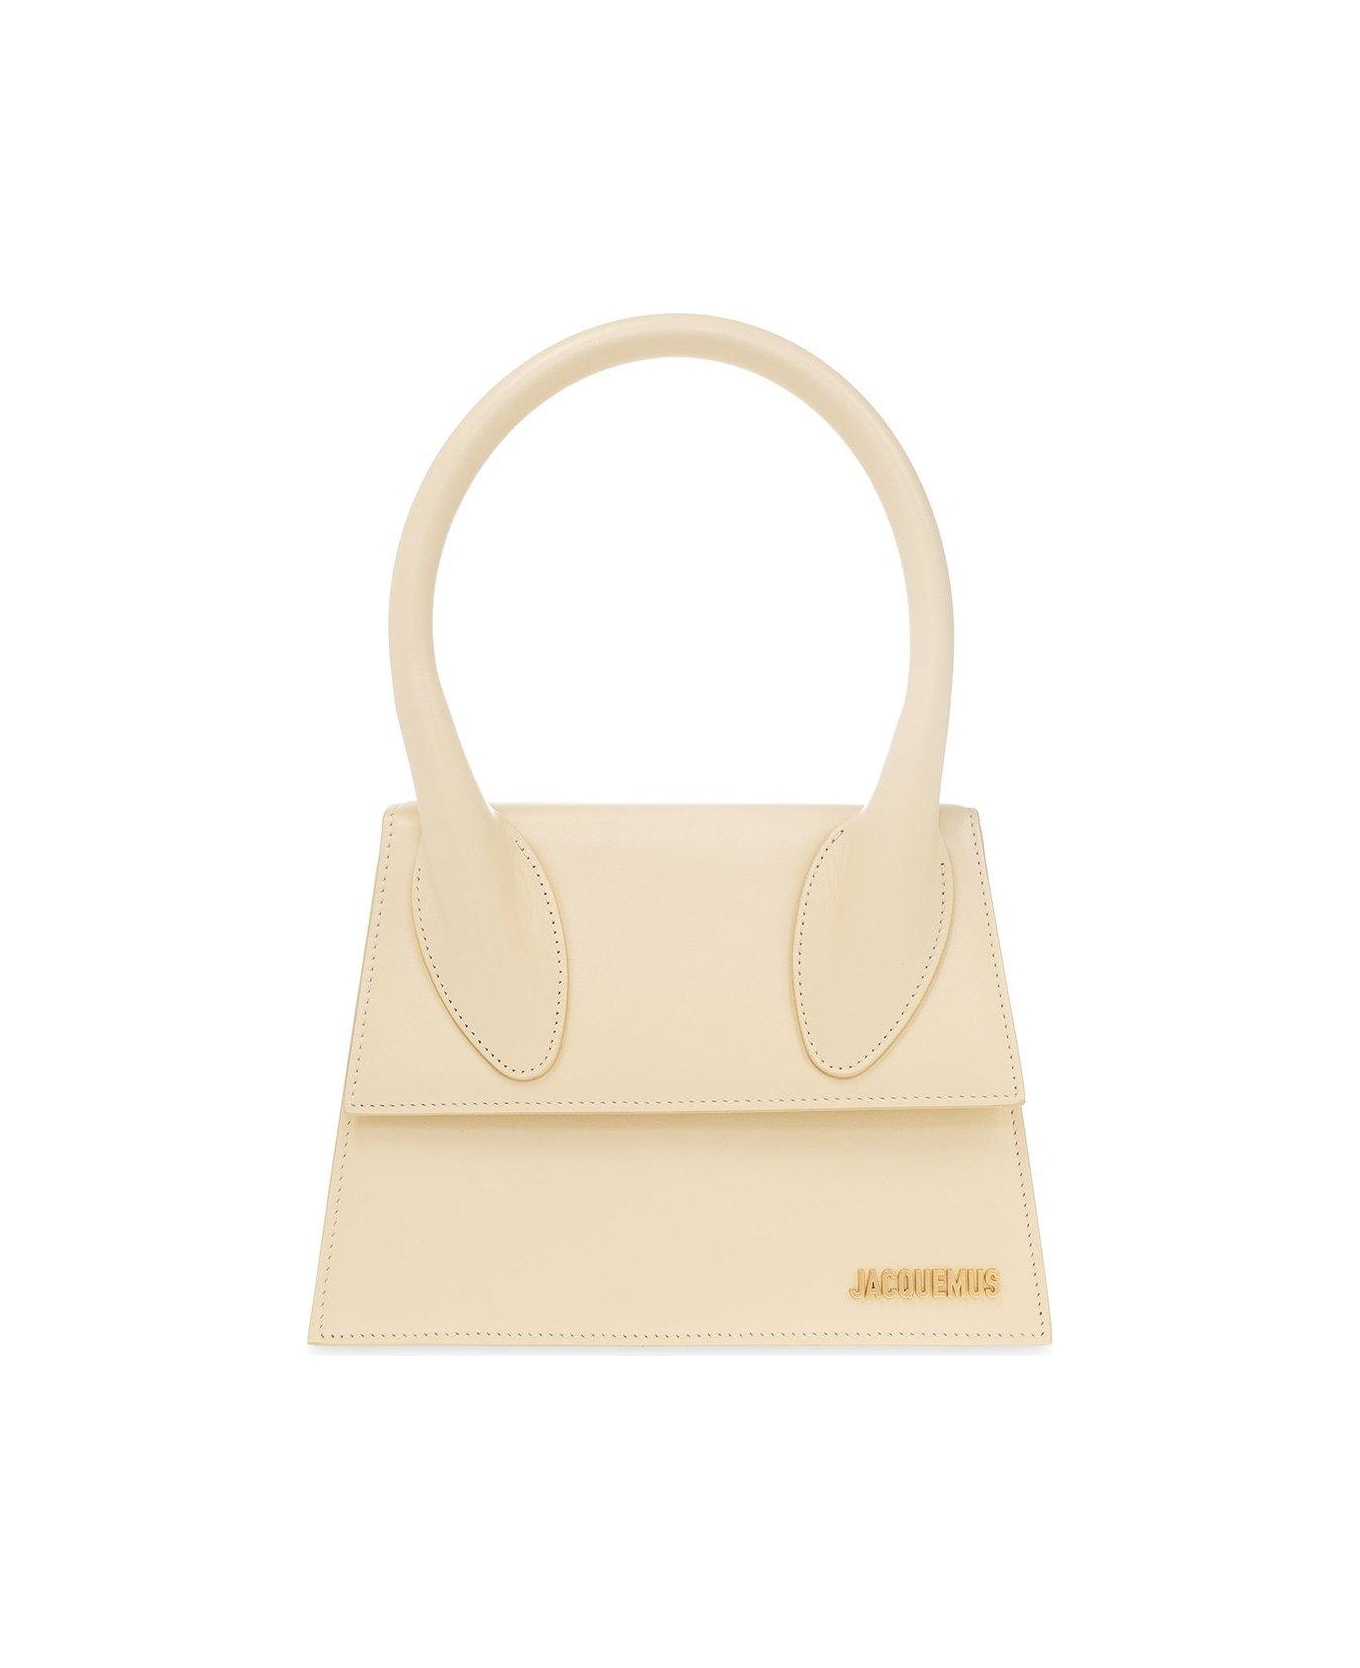 Jacquemus Le Grand Chiquito Tote Bag - White トートバッグ